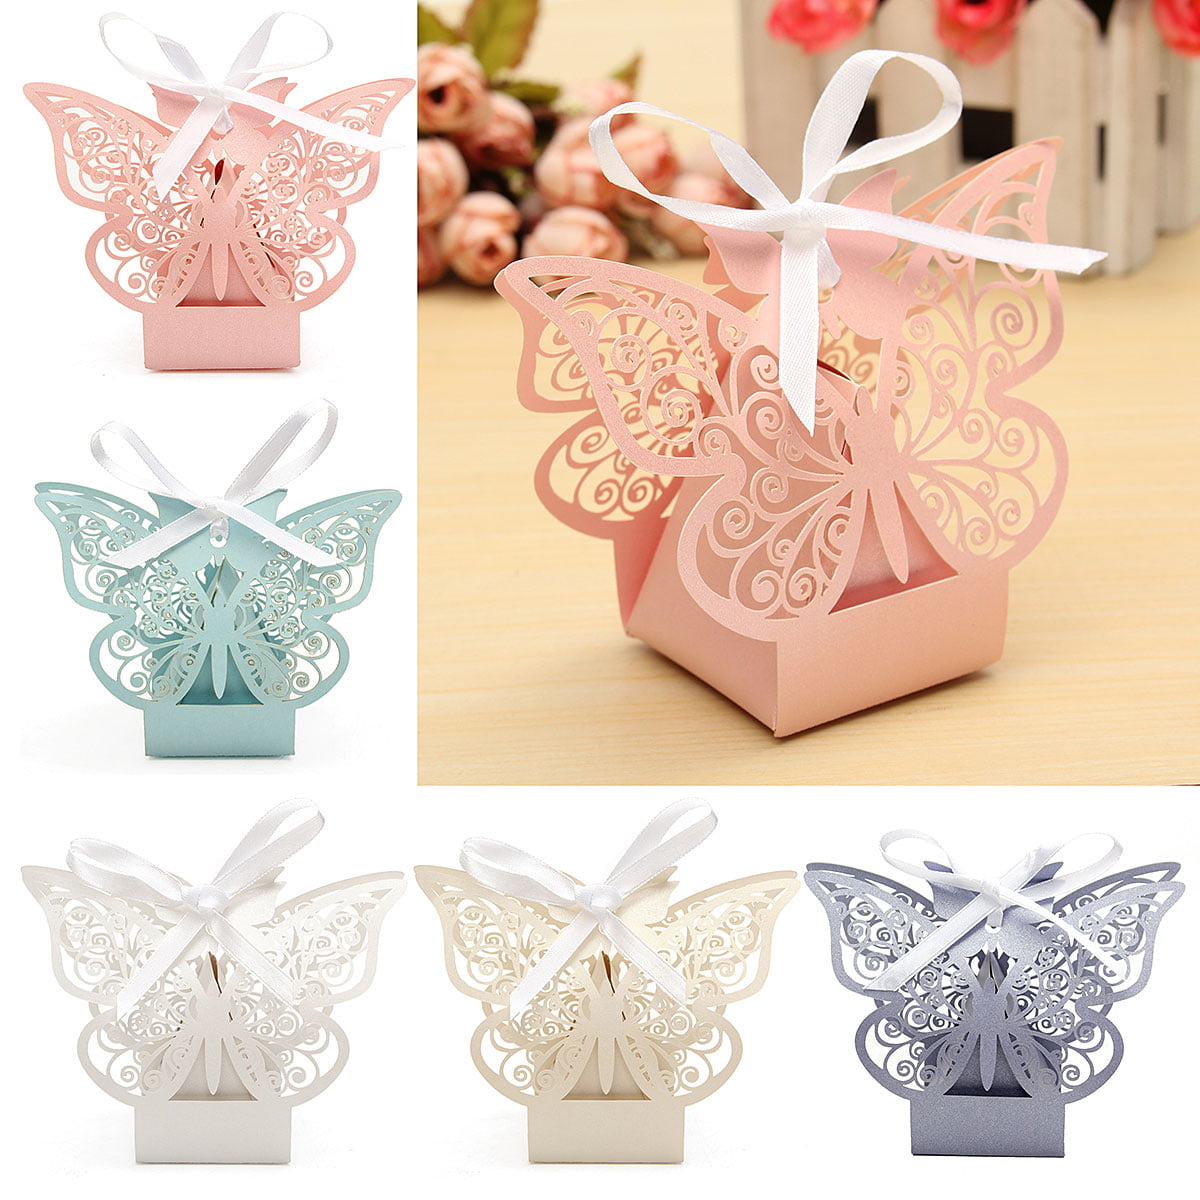 10pc Wedding Sweet Cake Candy Boxes Gift Birthday Party Favour Baby Shower Favor